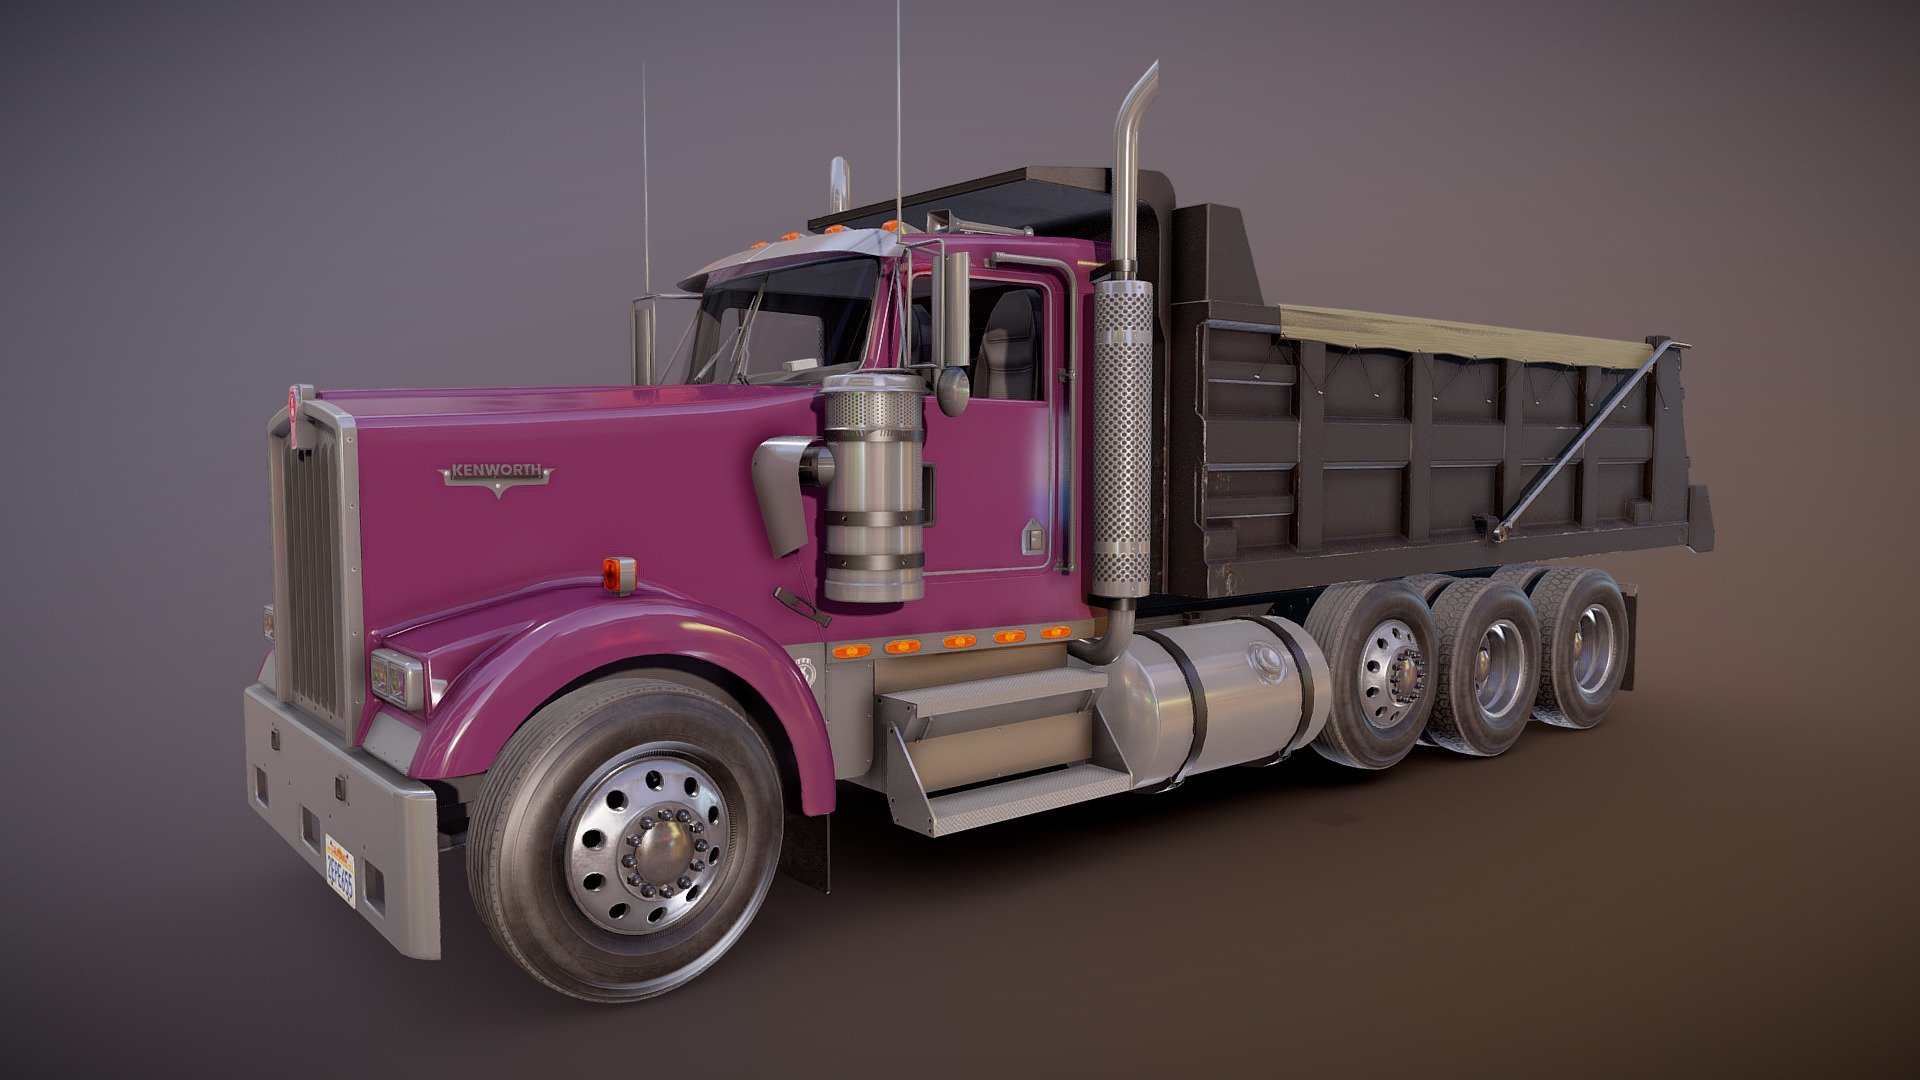 Kenworth dump truck game ready model.

Full textured model with clean topology.

High accuracy exterior model.

Different tires for rear and front wheels.

High detailed cabin - seams, rivets, chrome parts, wipers and etc.

High detailed rear suspension with axles and other parts.

Full modeled and textured dump inner space.

Lowpoly interior - 1811 tris 1074 verts.

Wheels - 25960 tris 14584 verts.

Full model - 73460 tris 42298 verts.

High detailed rims and tires, with PBR maps(Base_Color/Metallic/Normal/Roughness.png2048x2048 )

Original scale.

Lenght 10.7m , width 3.35m , height 4.1m.

Model ready for real-time apps, games, virtual reality and augmented reality.

Asset looks accuracy and realistic and become a good part of your project 3d model